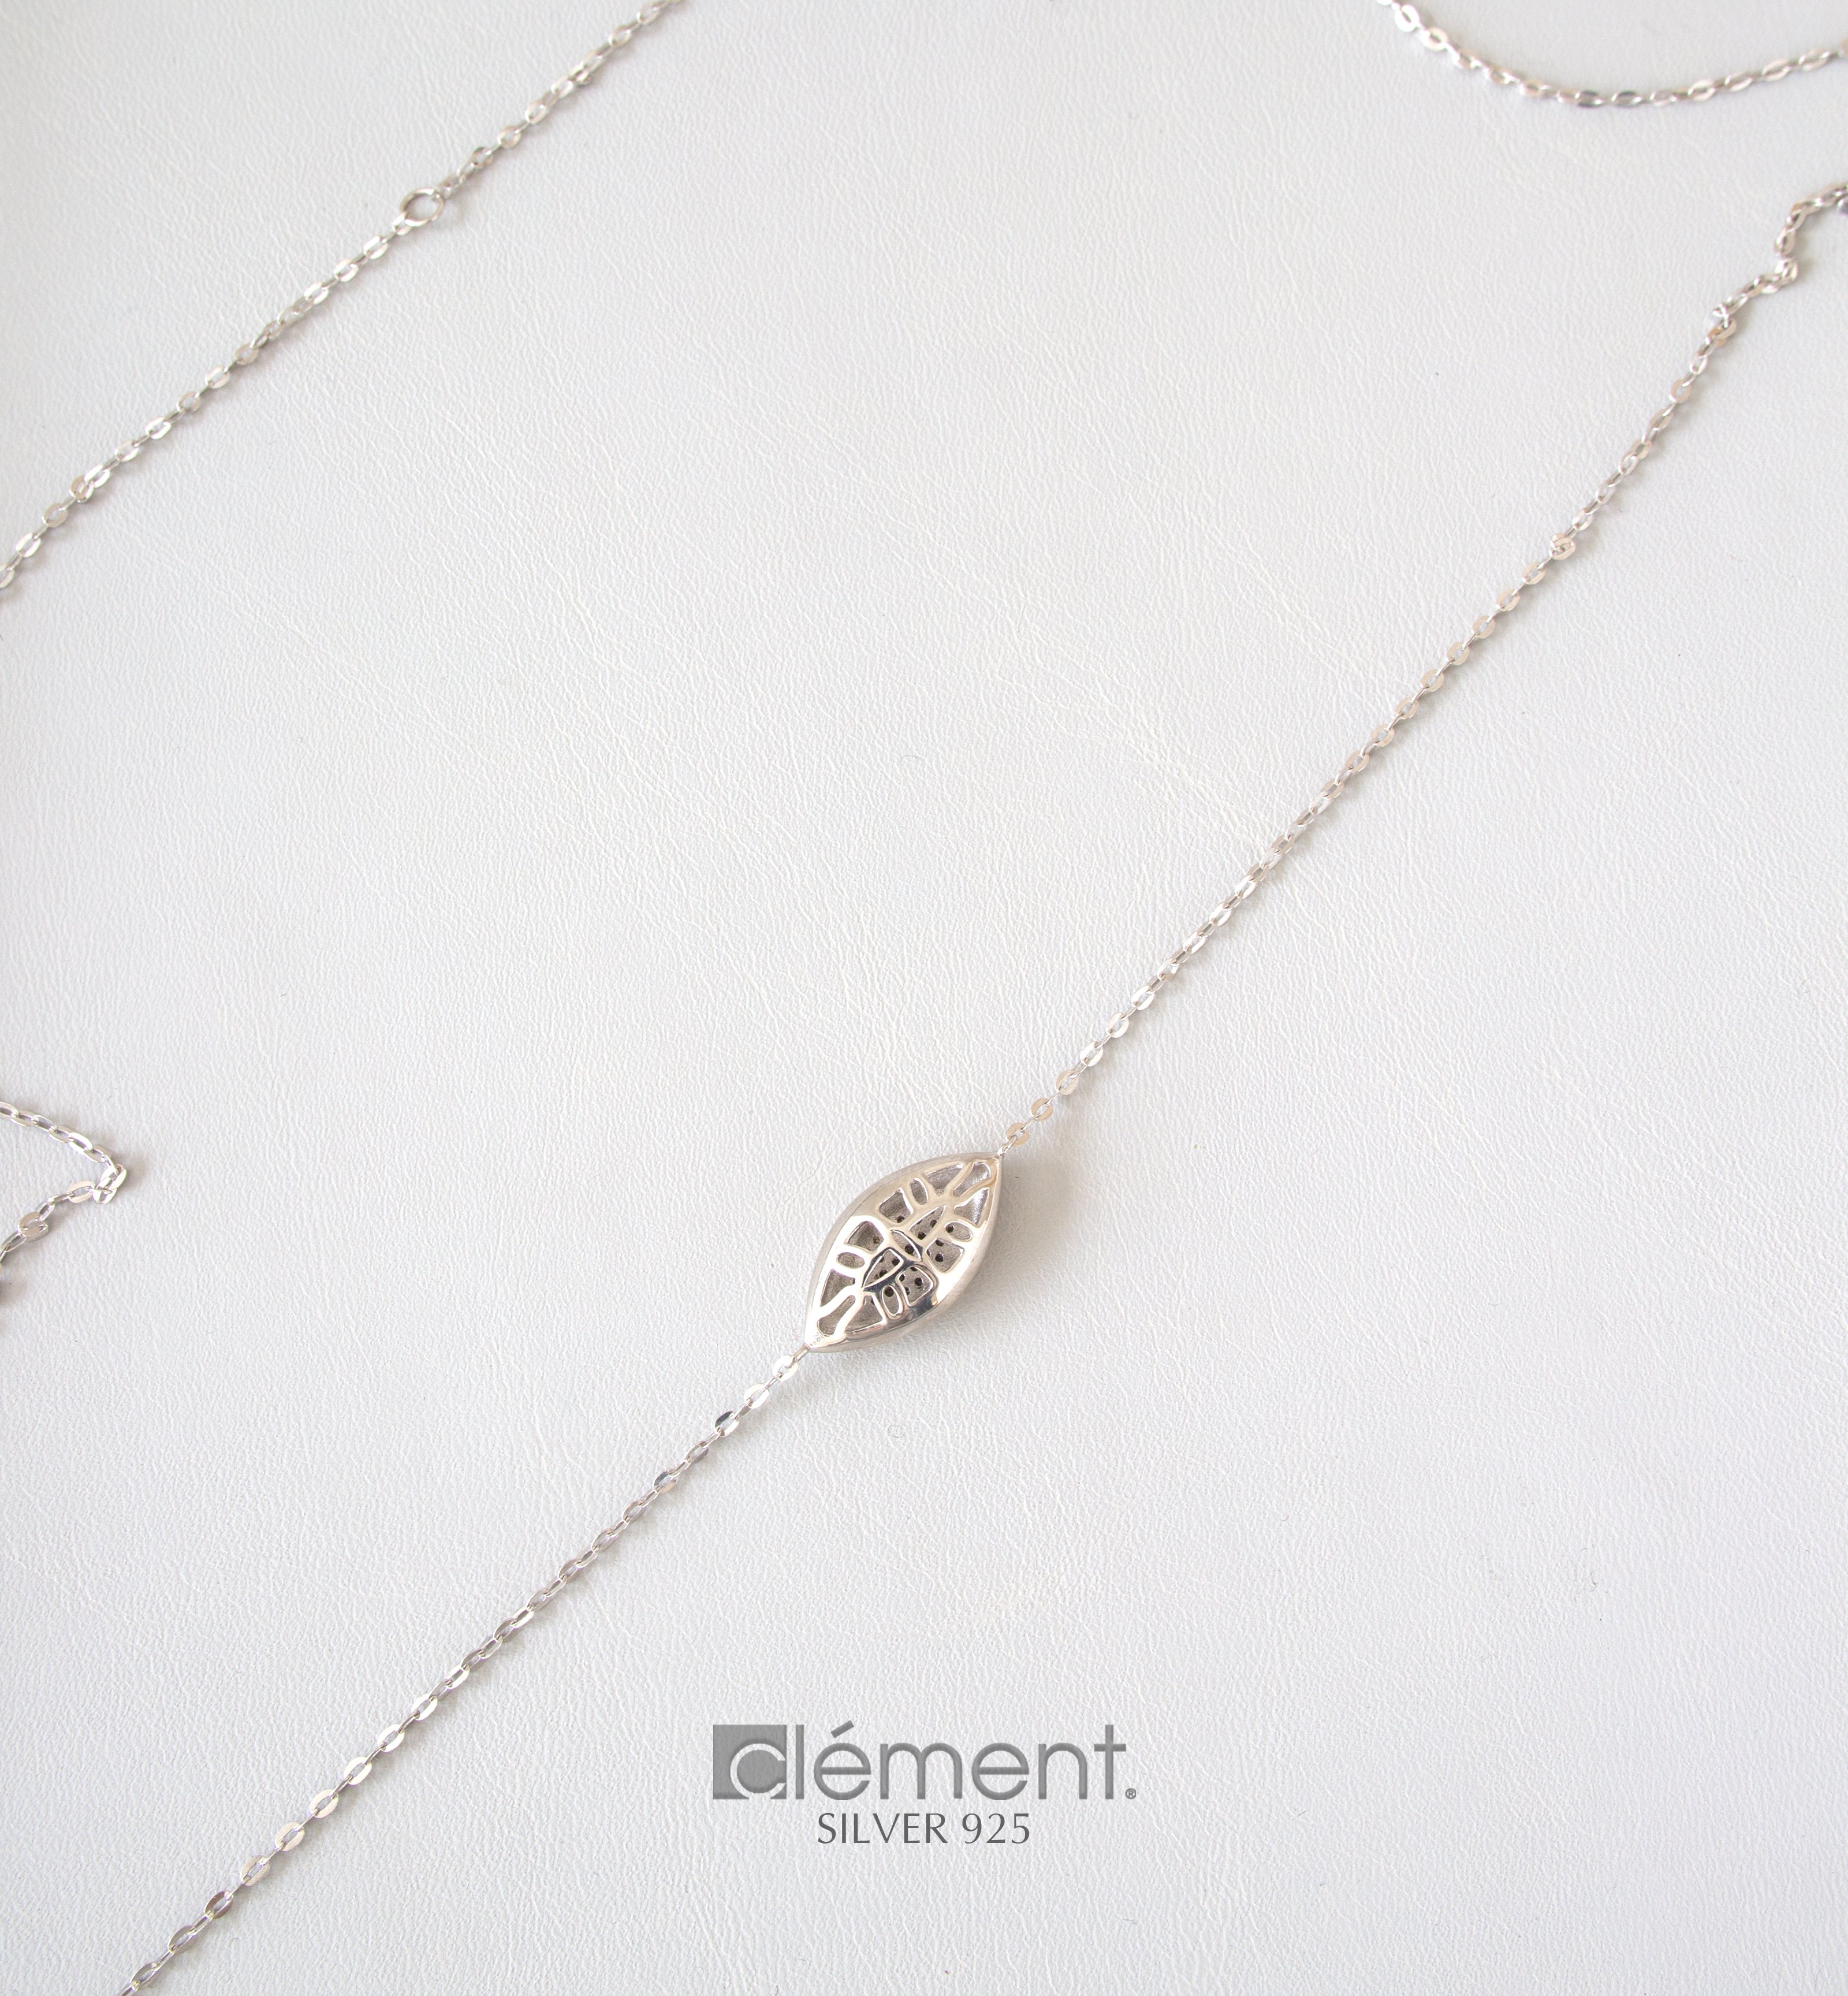 Silver 925 Long Necklace with CZ Stones